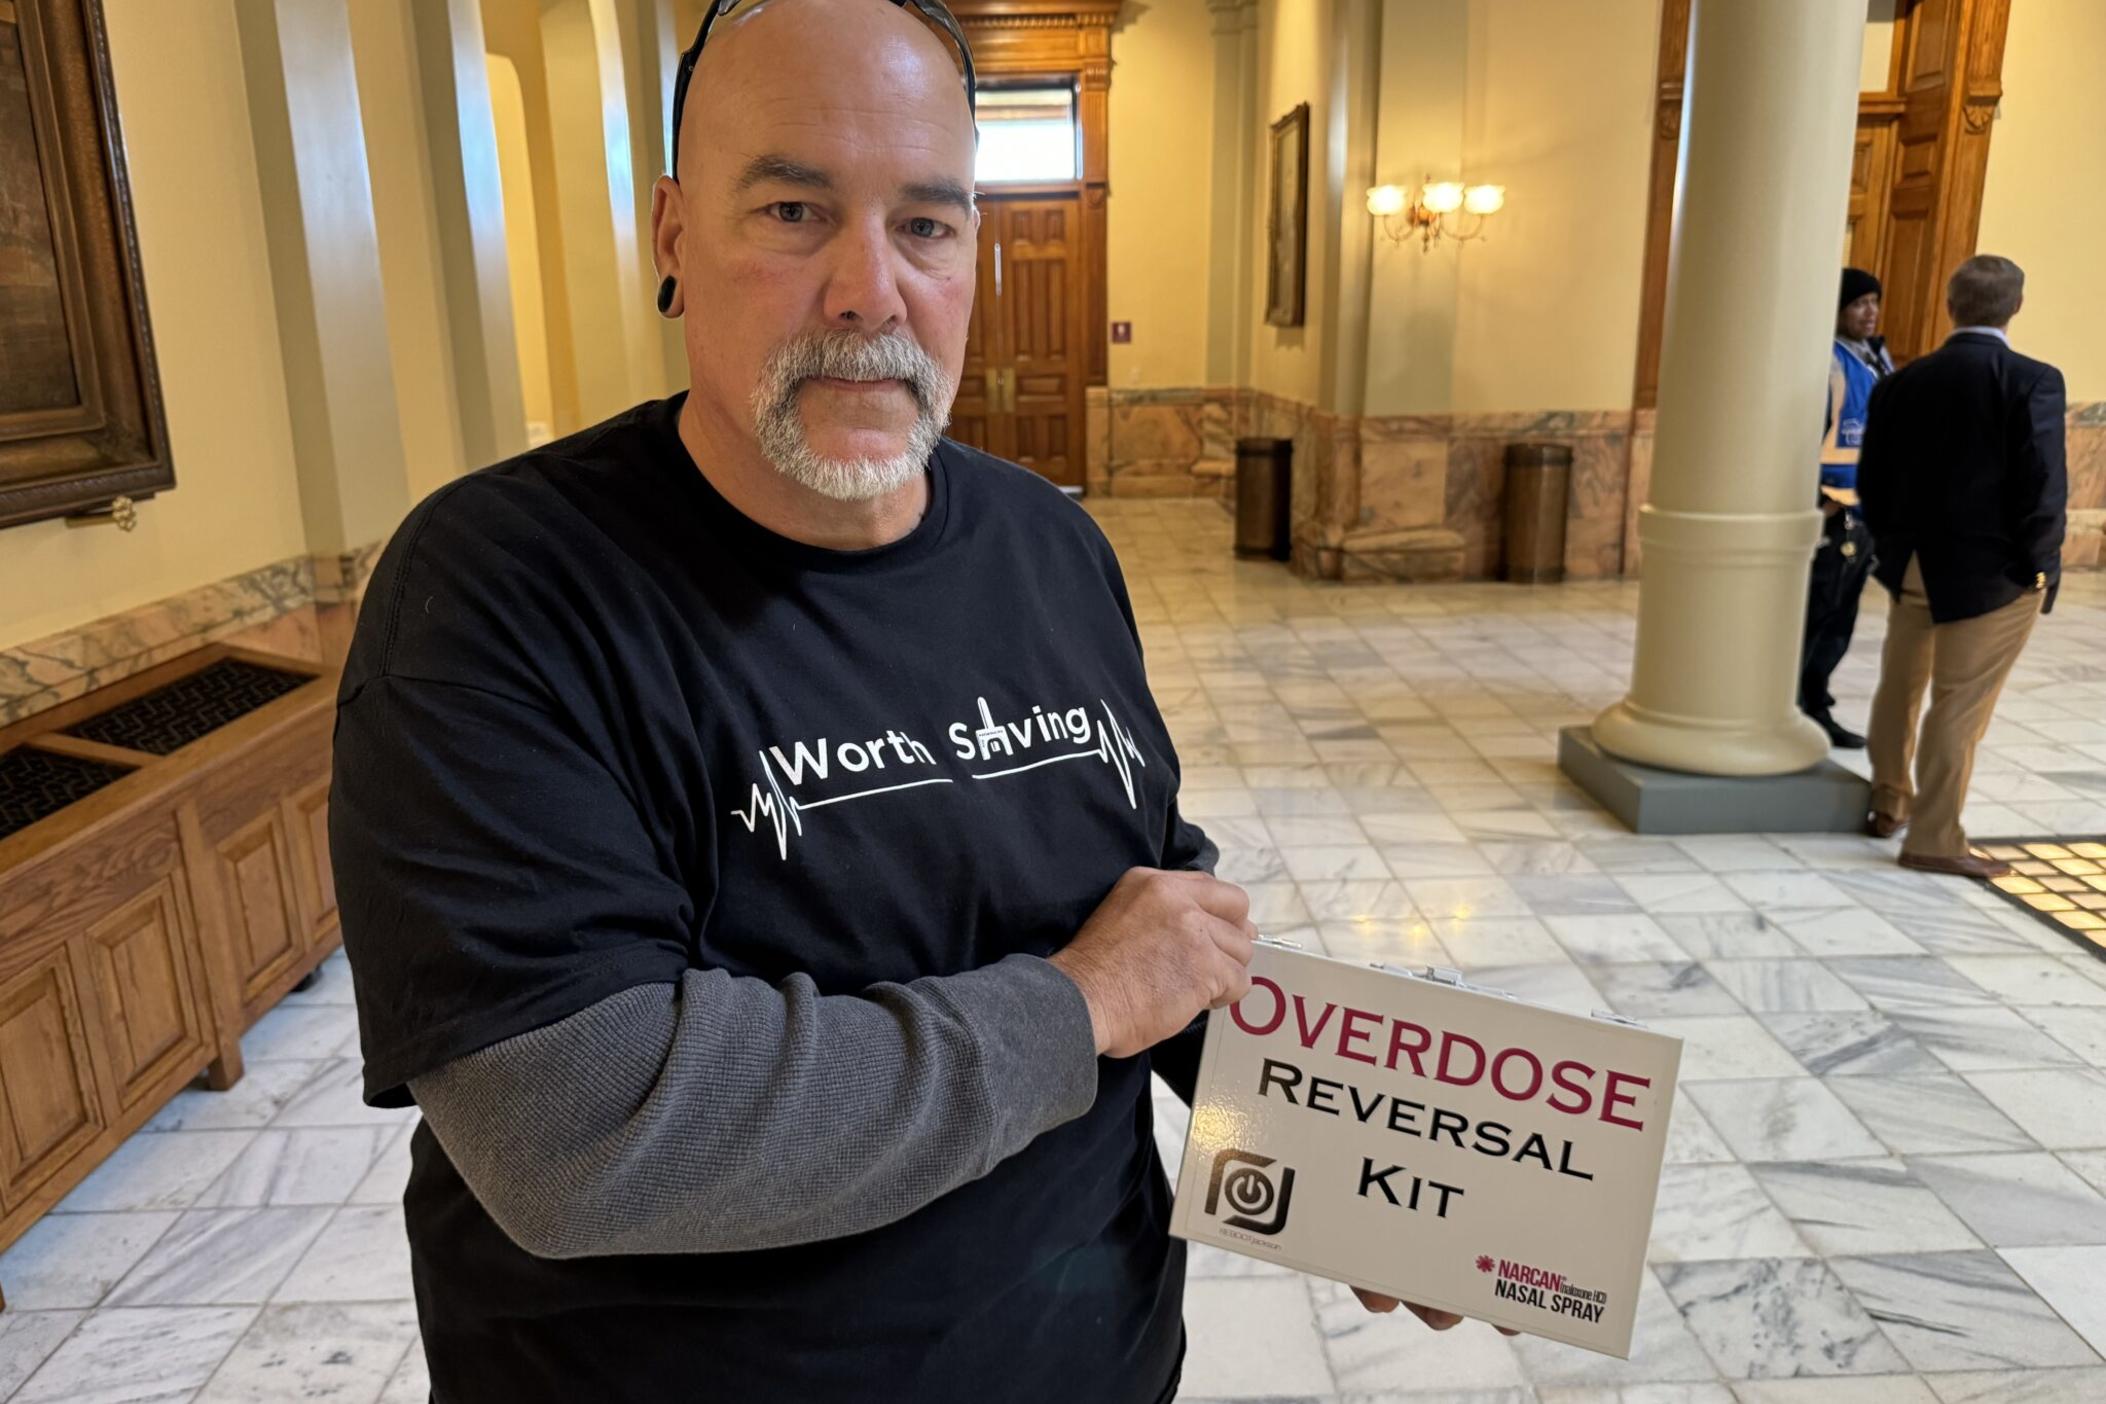 Jon Langston, founder and president of Reboot Jackson, which is a recovery community organization in Jackson County, displays a naloxone kit while at the state Capitol in January. Jill Nolin/Georgia Recorder